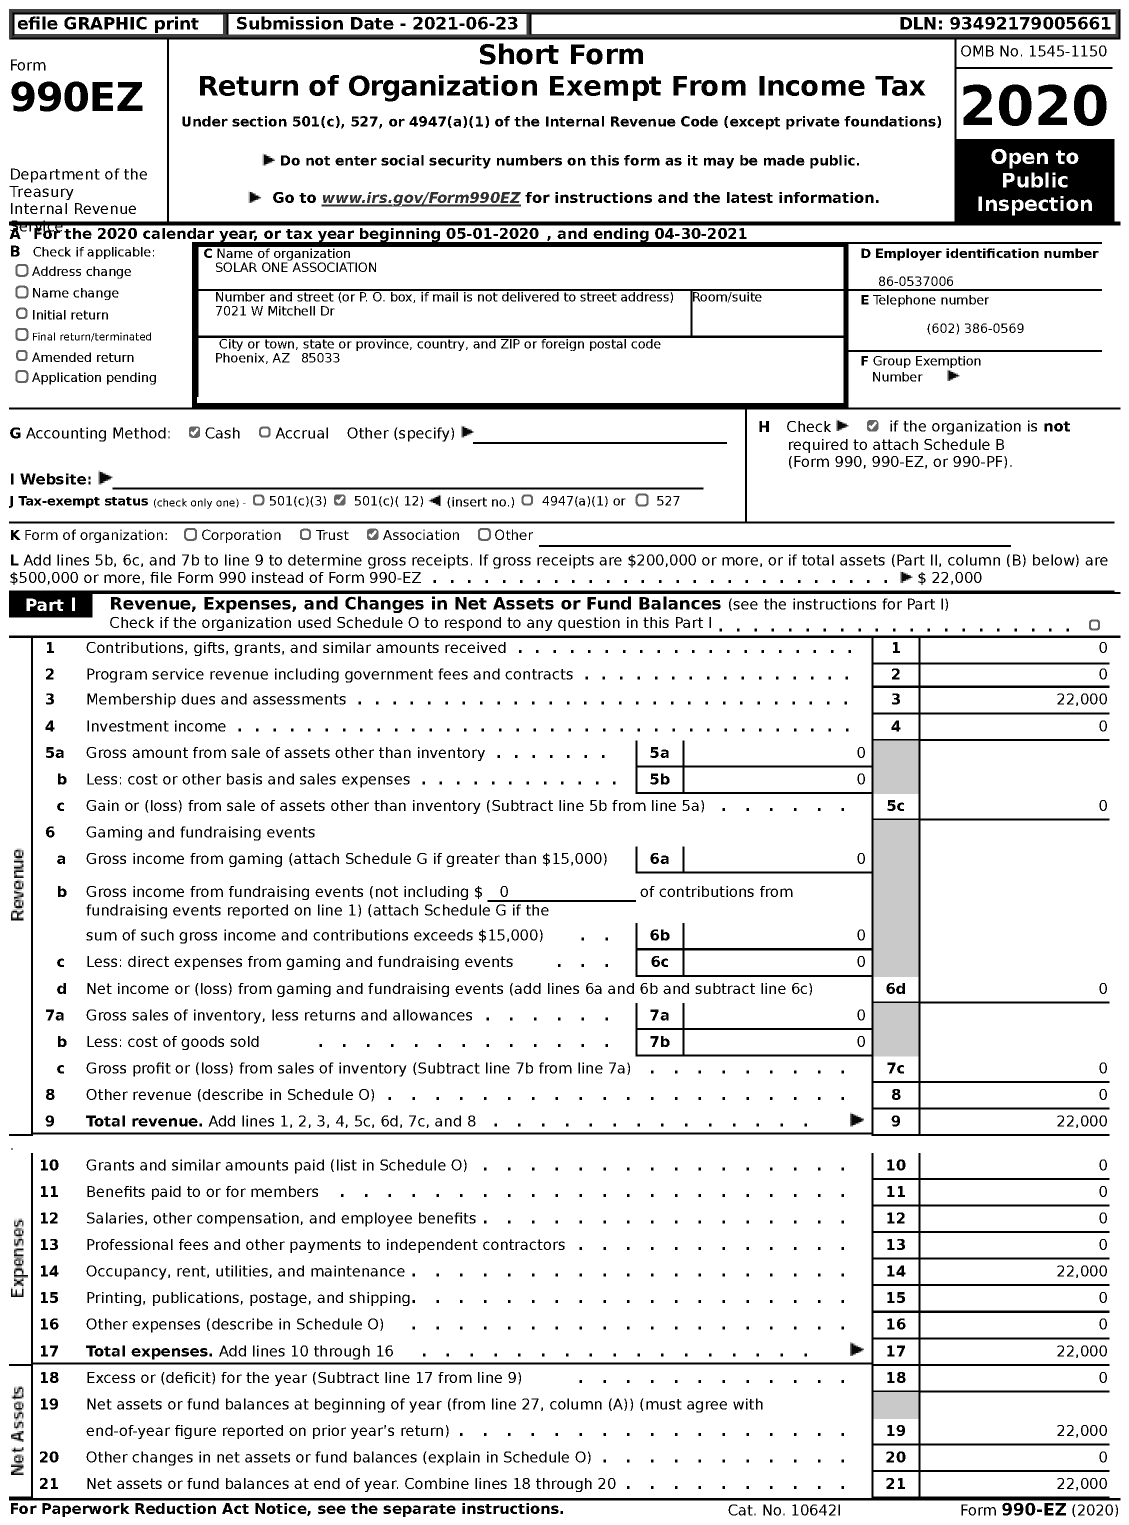 Image of first page of 2020 Form 990EZ for Solar One Association